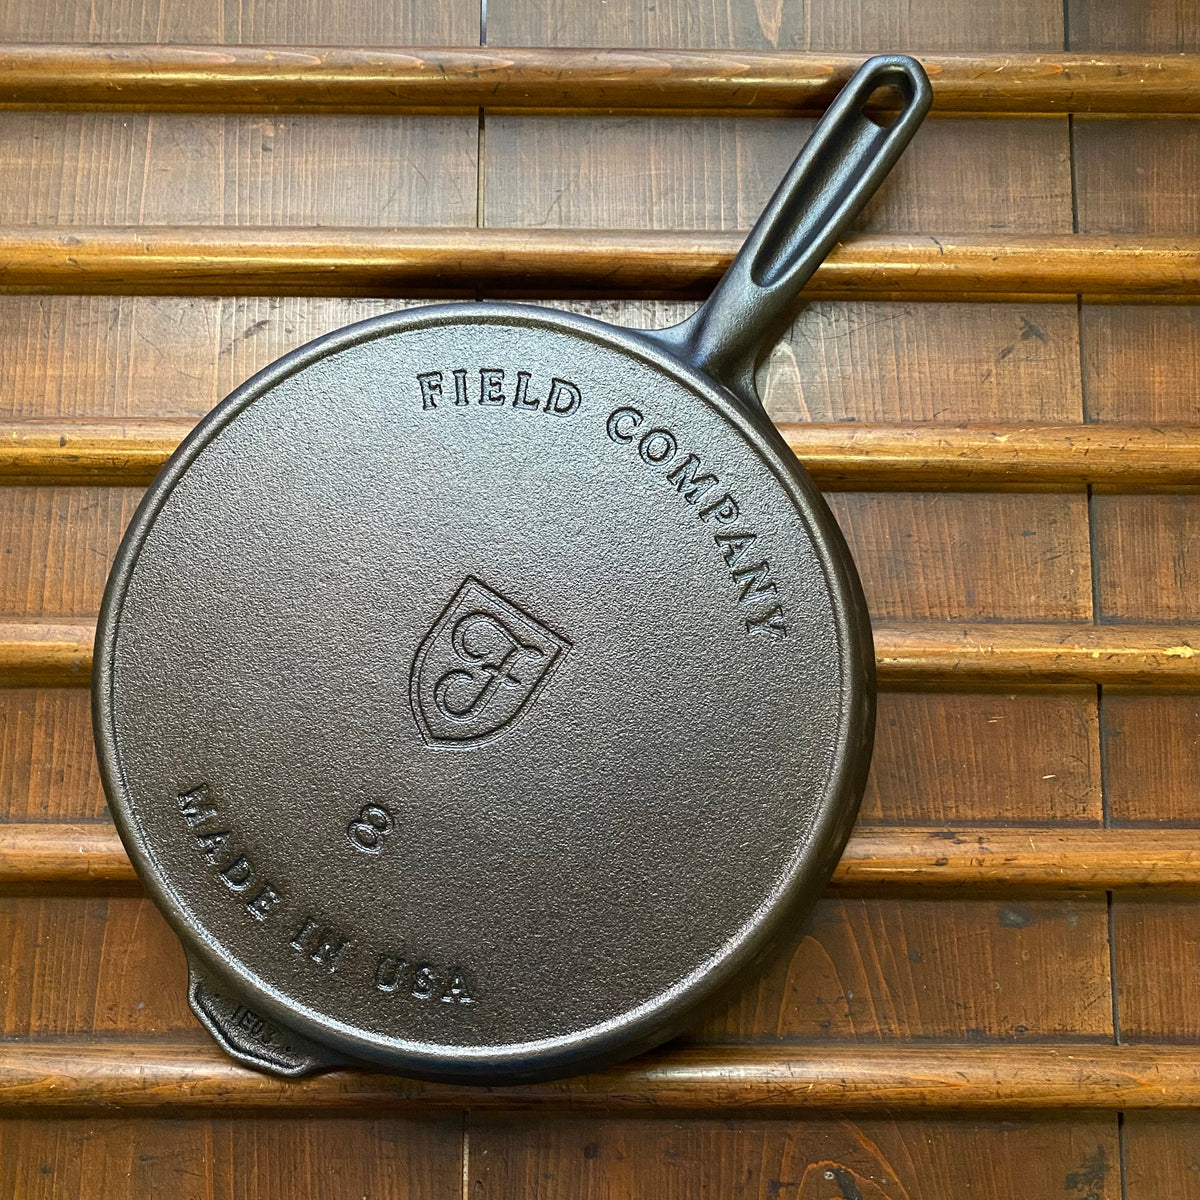 Why You Need an 8-Inch Skillet